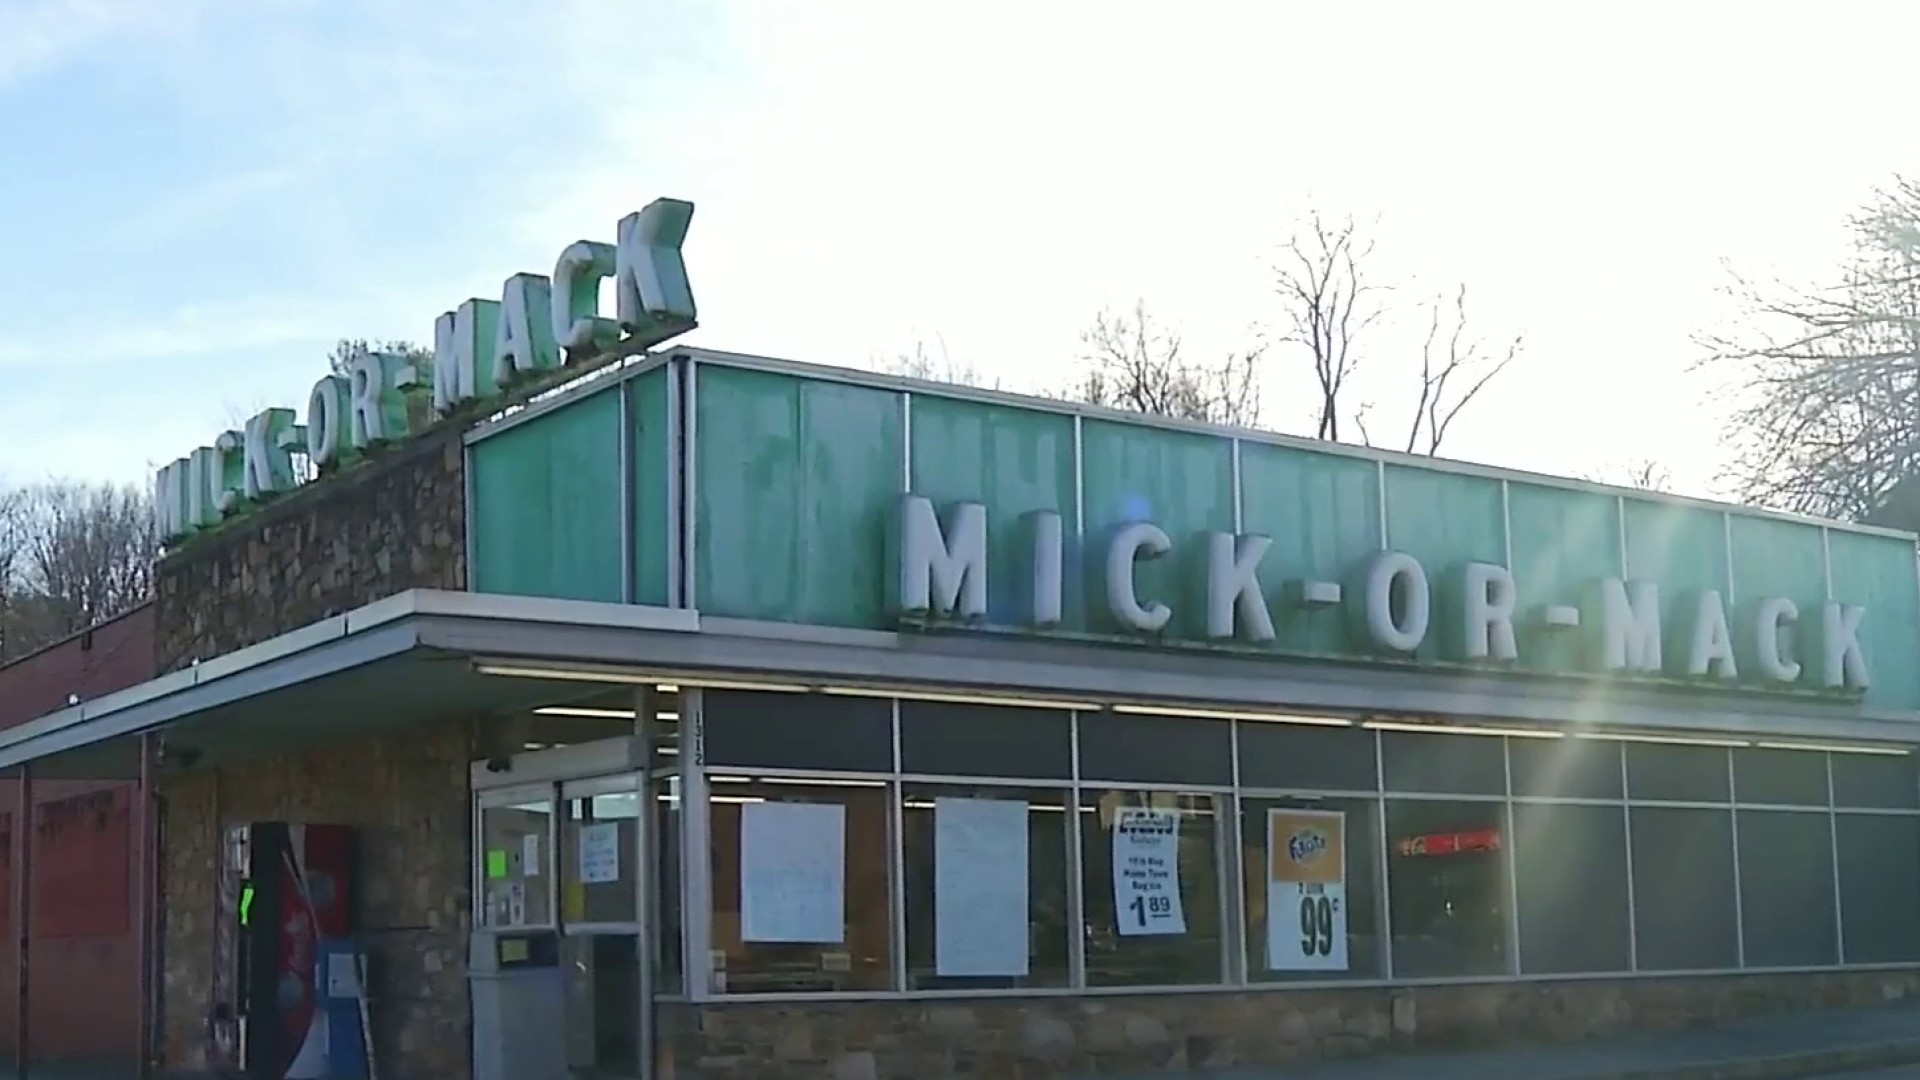 Historic grocery chain Mick-or-Mack to close its last store